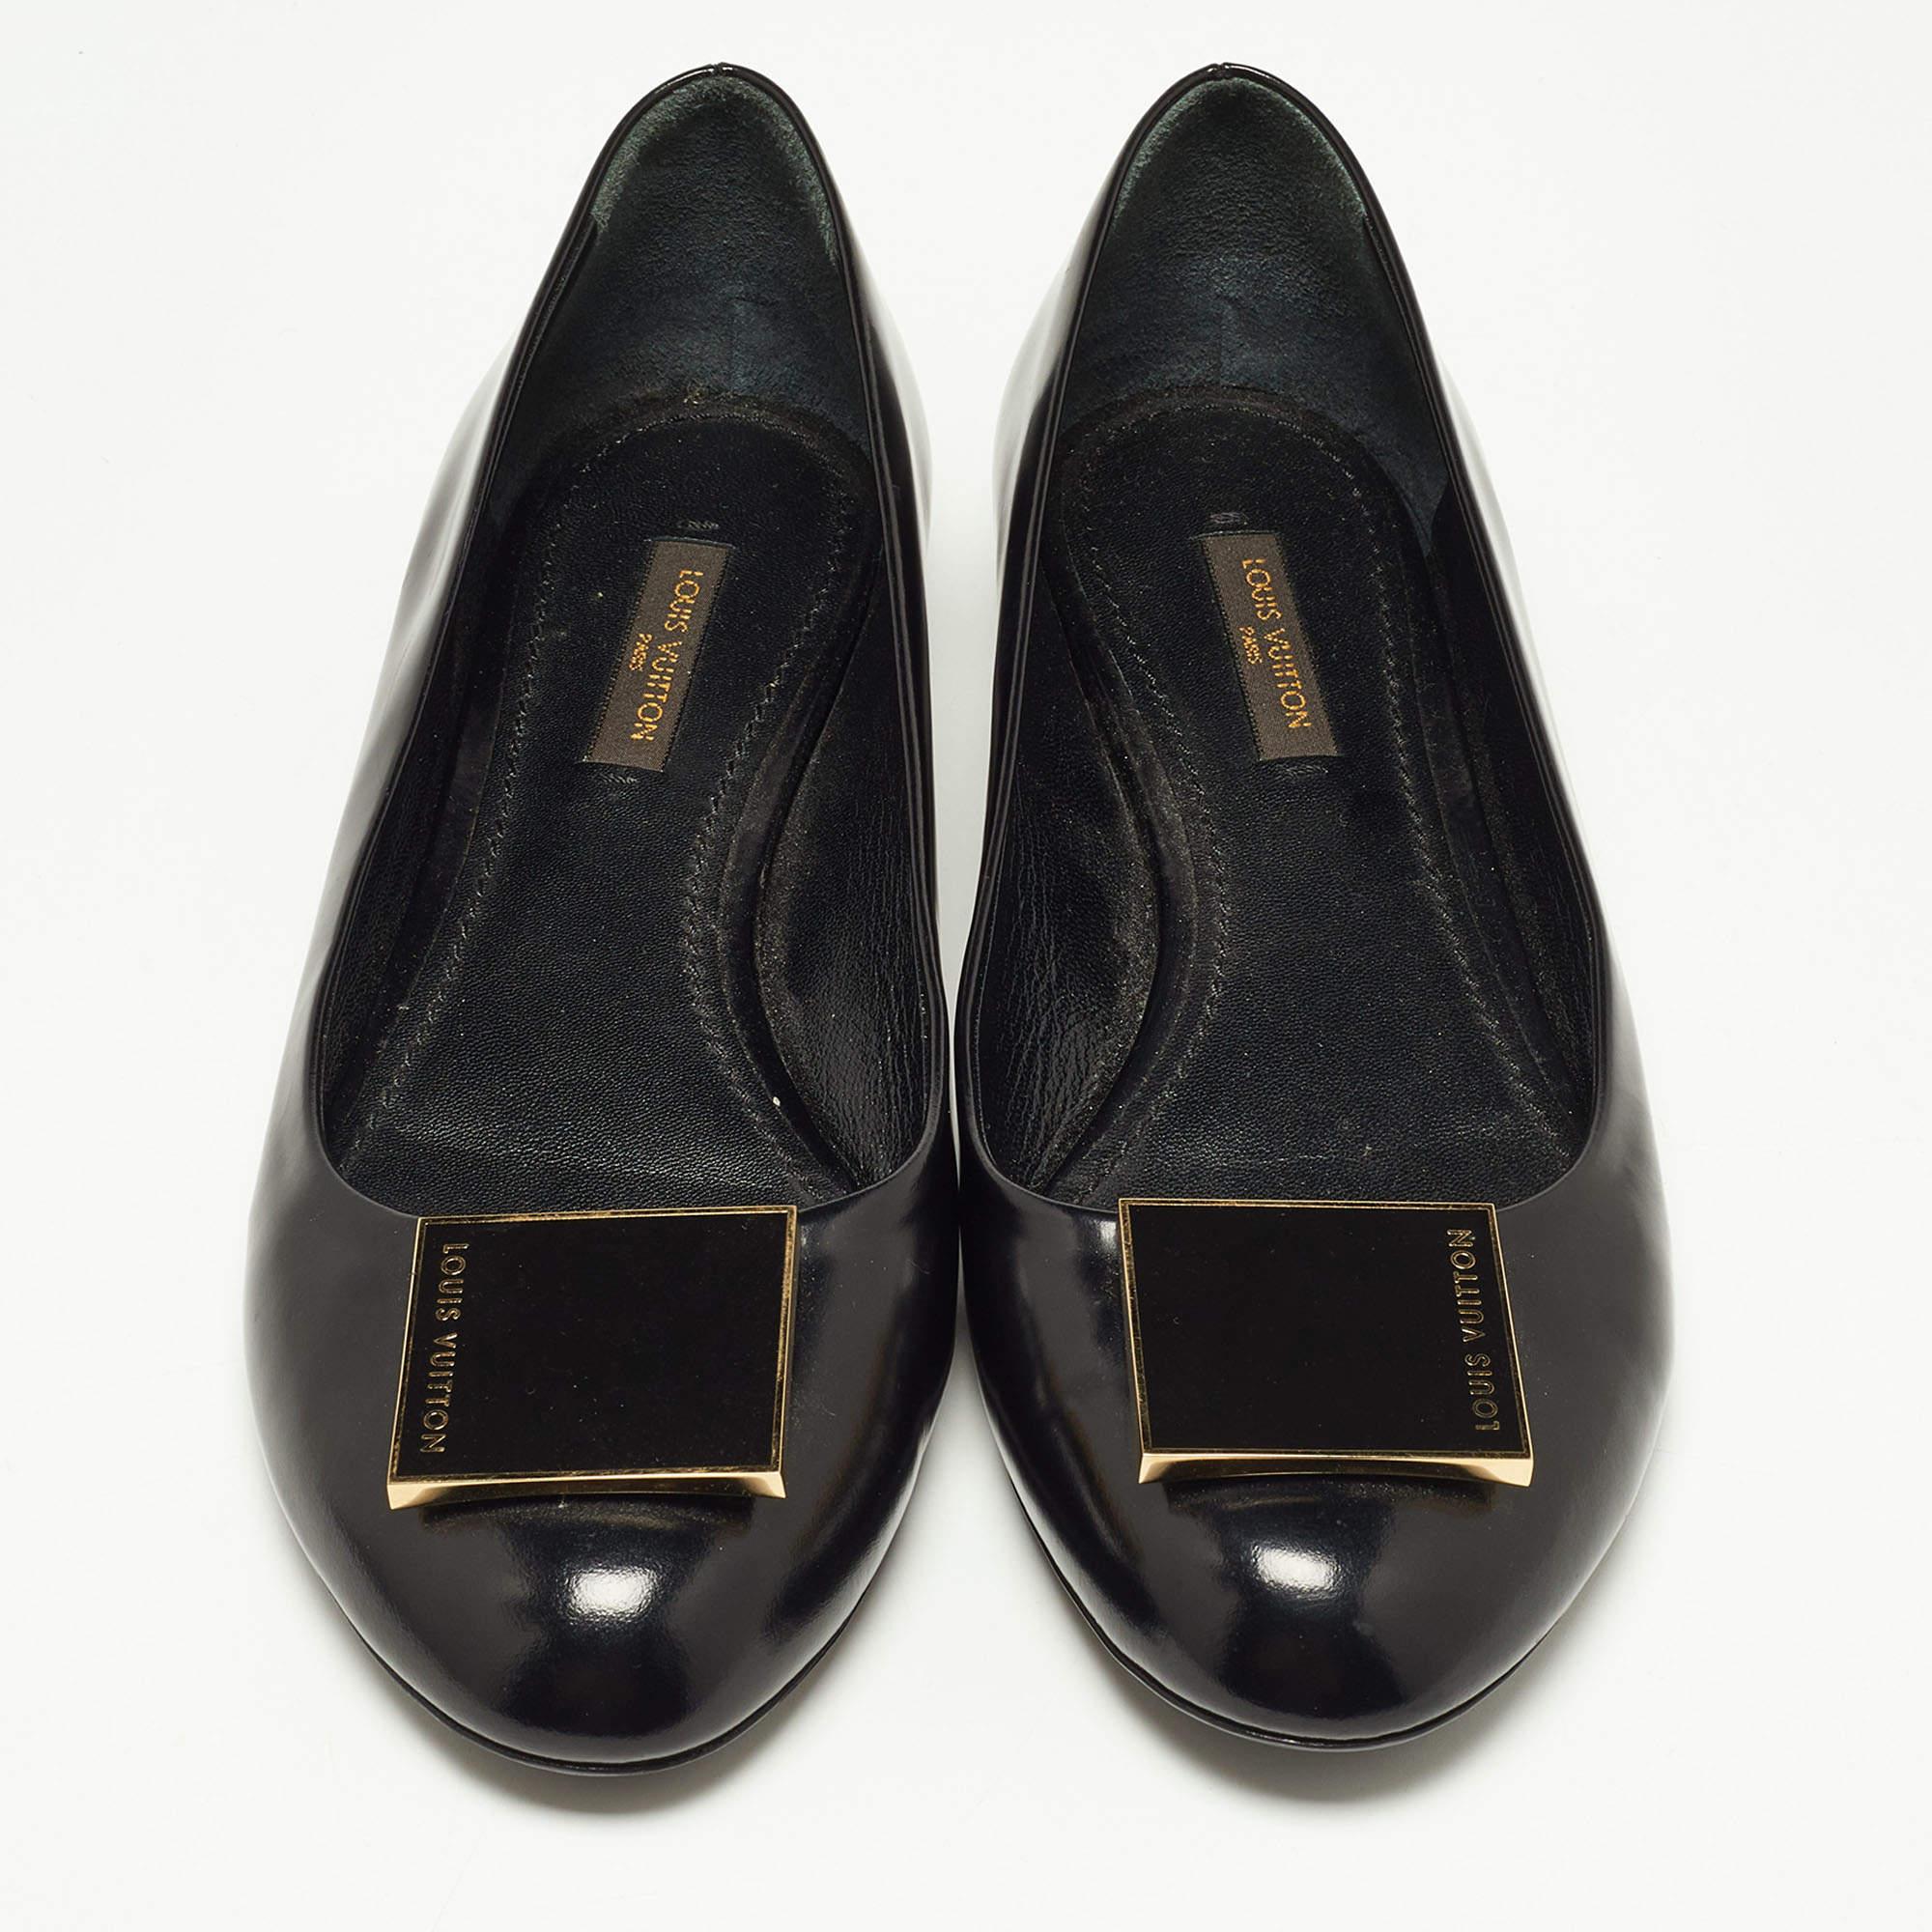 Stay comfortable throughout your day or at work in these beautiful black ballet flats from Louis Vuitton. These flats are made of quality leather and come with round toes, square accents on the uppers with logo detailing and leather insoles.

